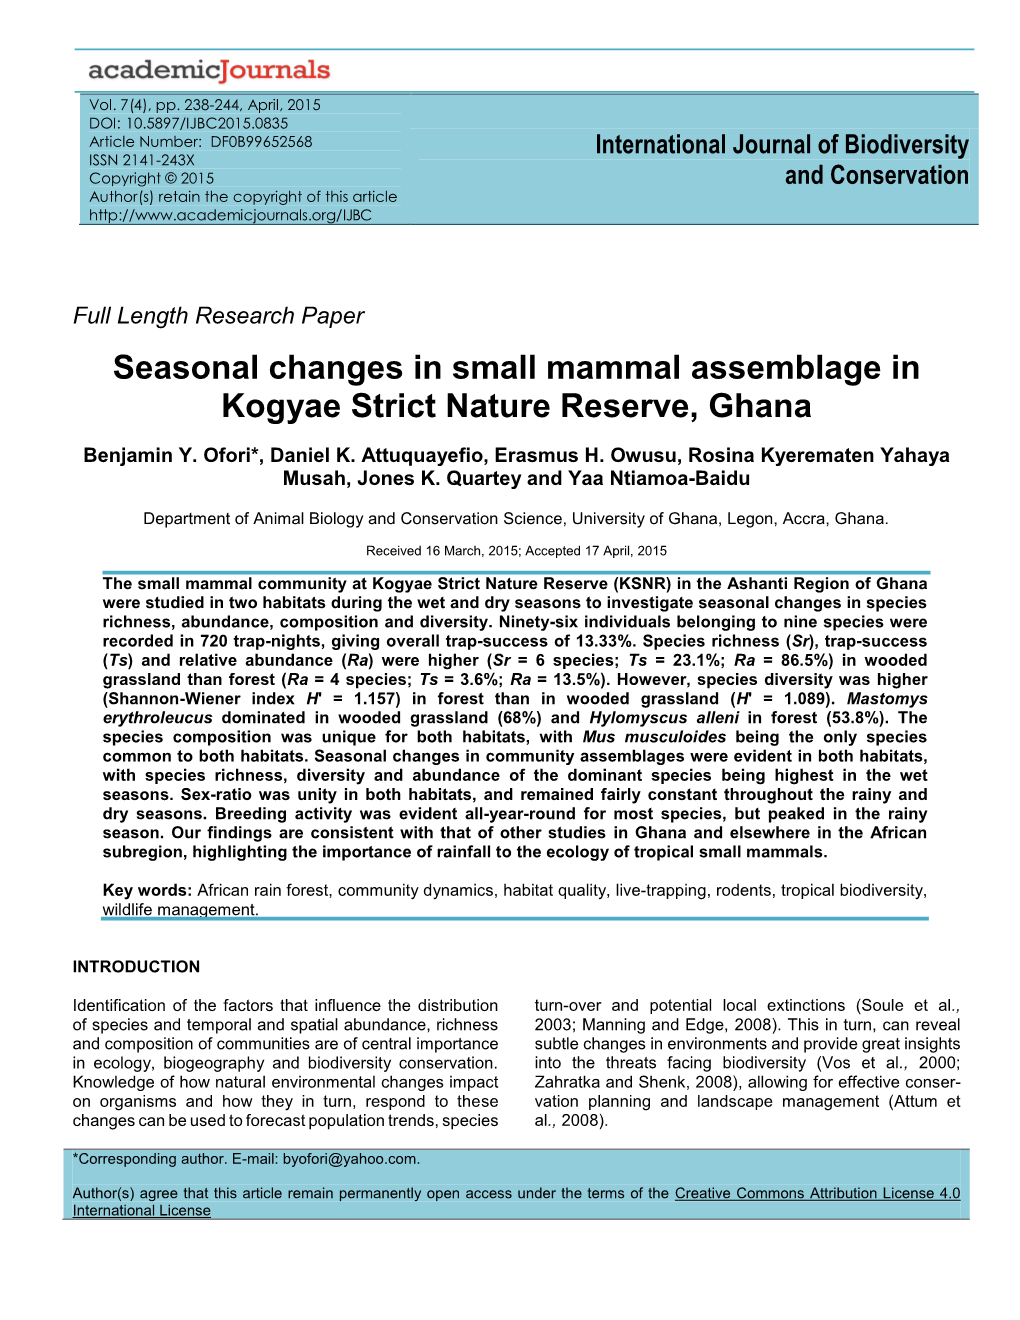 Seasonal Changes in Small Mammal Assemblage in Kogyae Strict Nature Reserve, Ghana